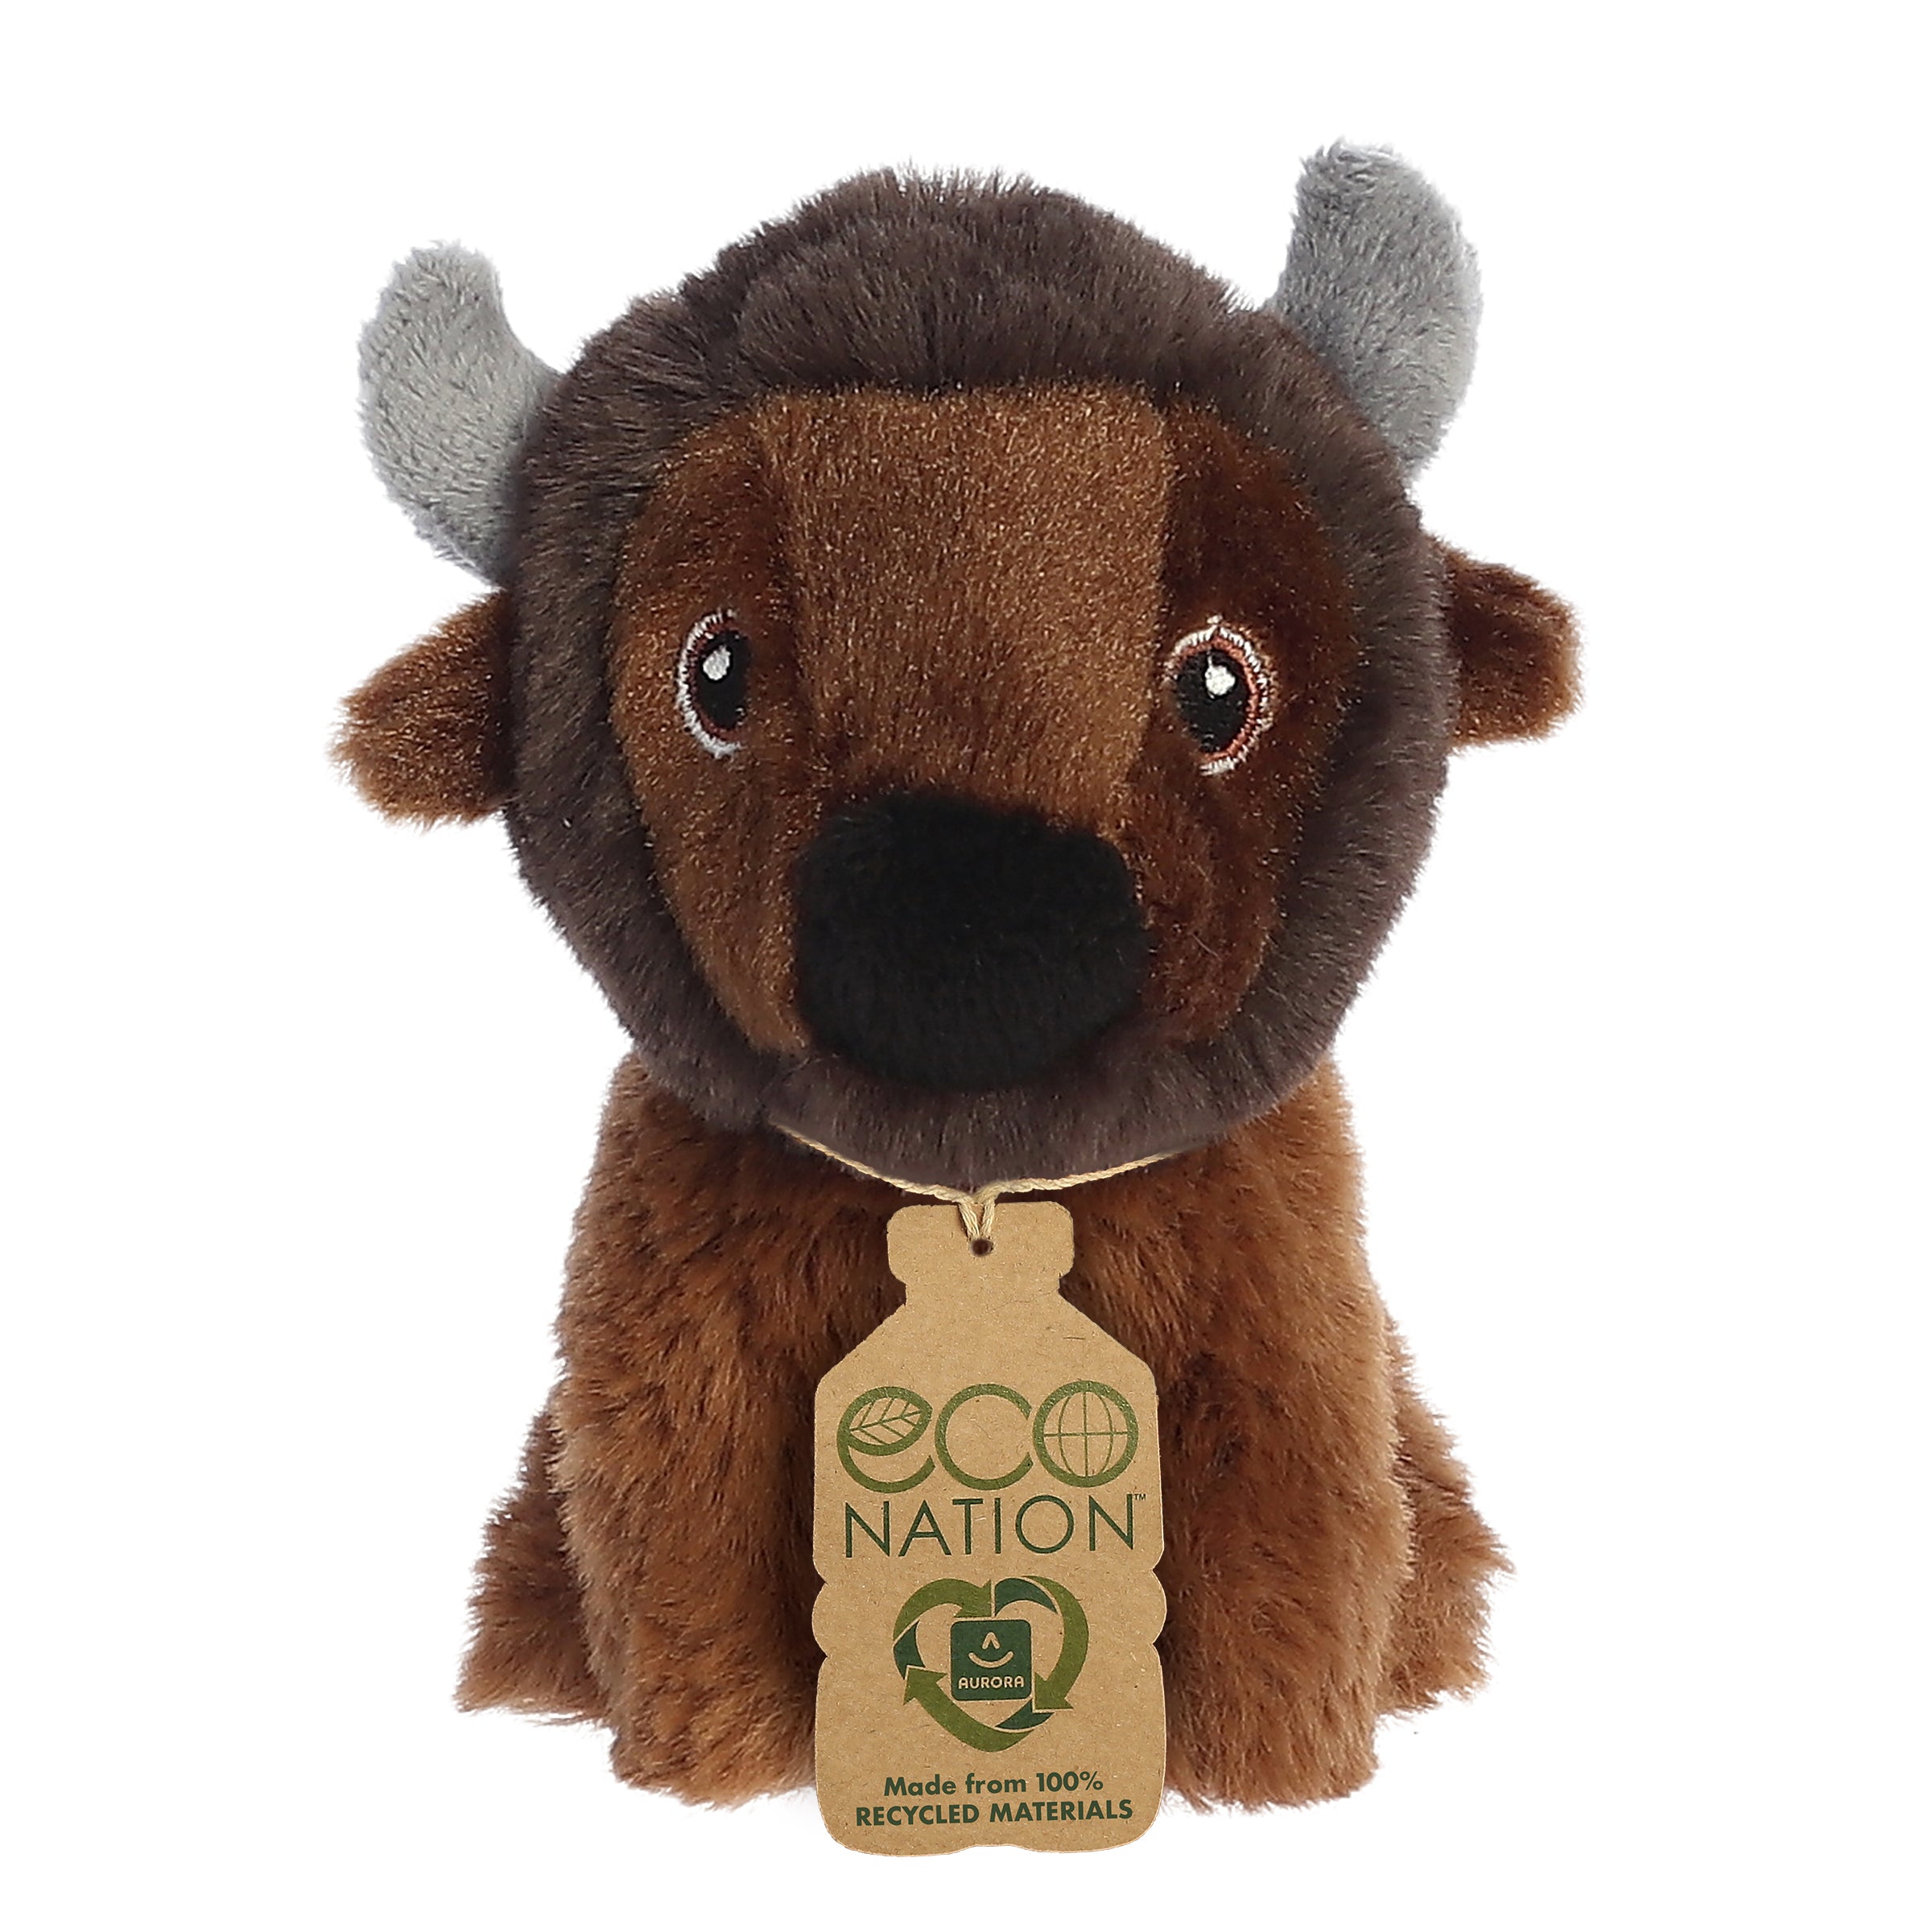 A cute brown bison plush with soft grey horns that have been embroidered with plastic-free eyes with an eco-nation tag.